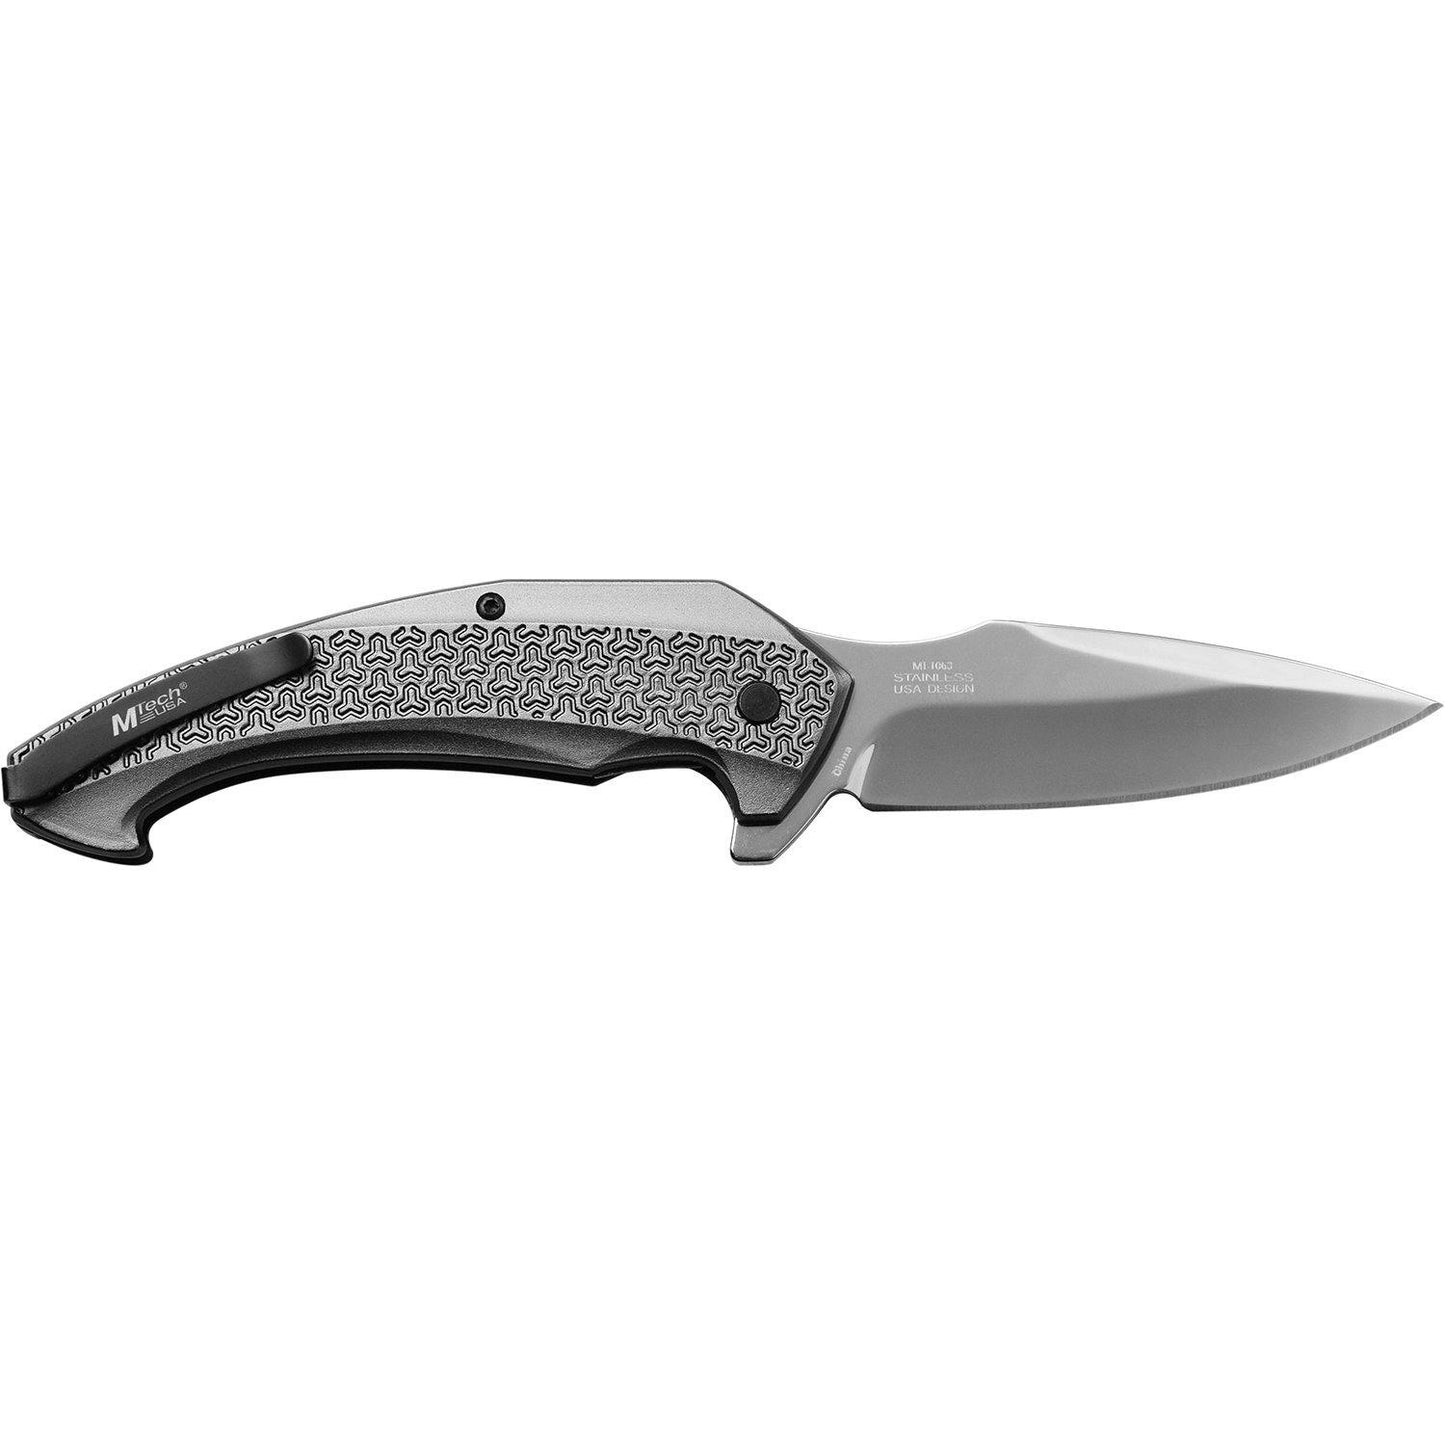 Mtech Spear Point Fine Edge Blade Folding Knife - 8 Inches Overall Grey #mt-1063Gy - Xhunter New Zealand